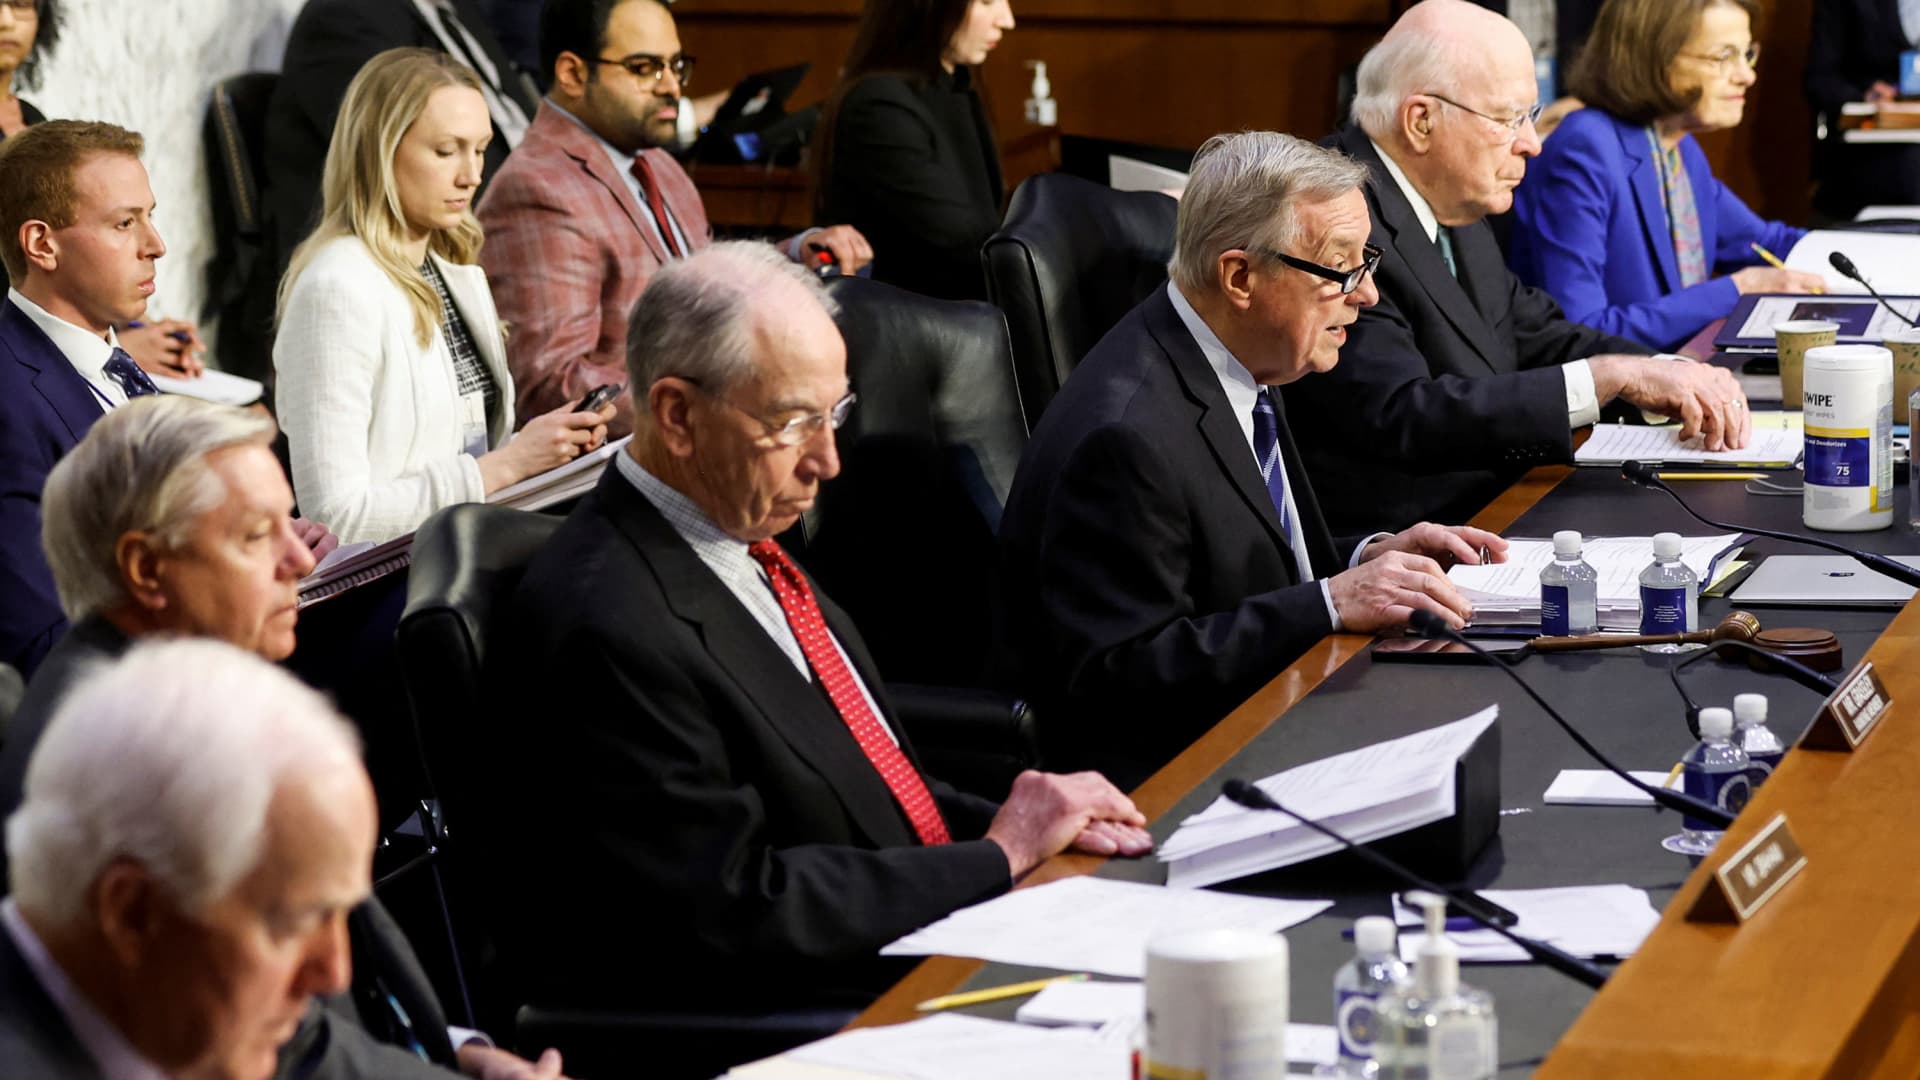 U.S. Senate Judiciary Committee Chair Dick Durbin (D-IL) is flanked by committee members as he presides during a Senate Judiciary Committee confirmation hearing on Judge Ketanji Brown Jackson's nomination to the U.S. Supreme Court, on Capitol Hill in Washington, March 21, 2022.